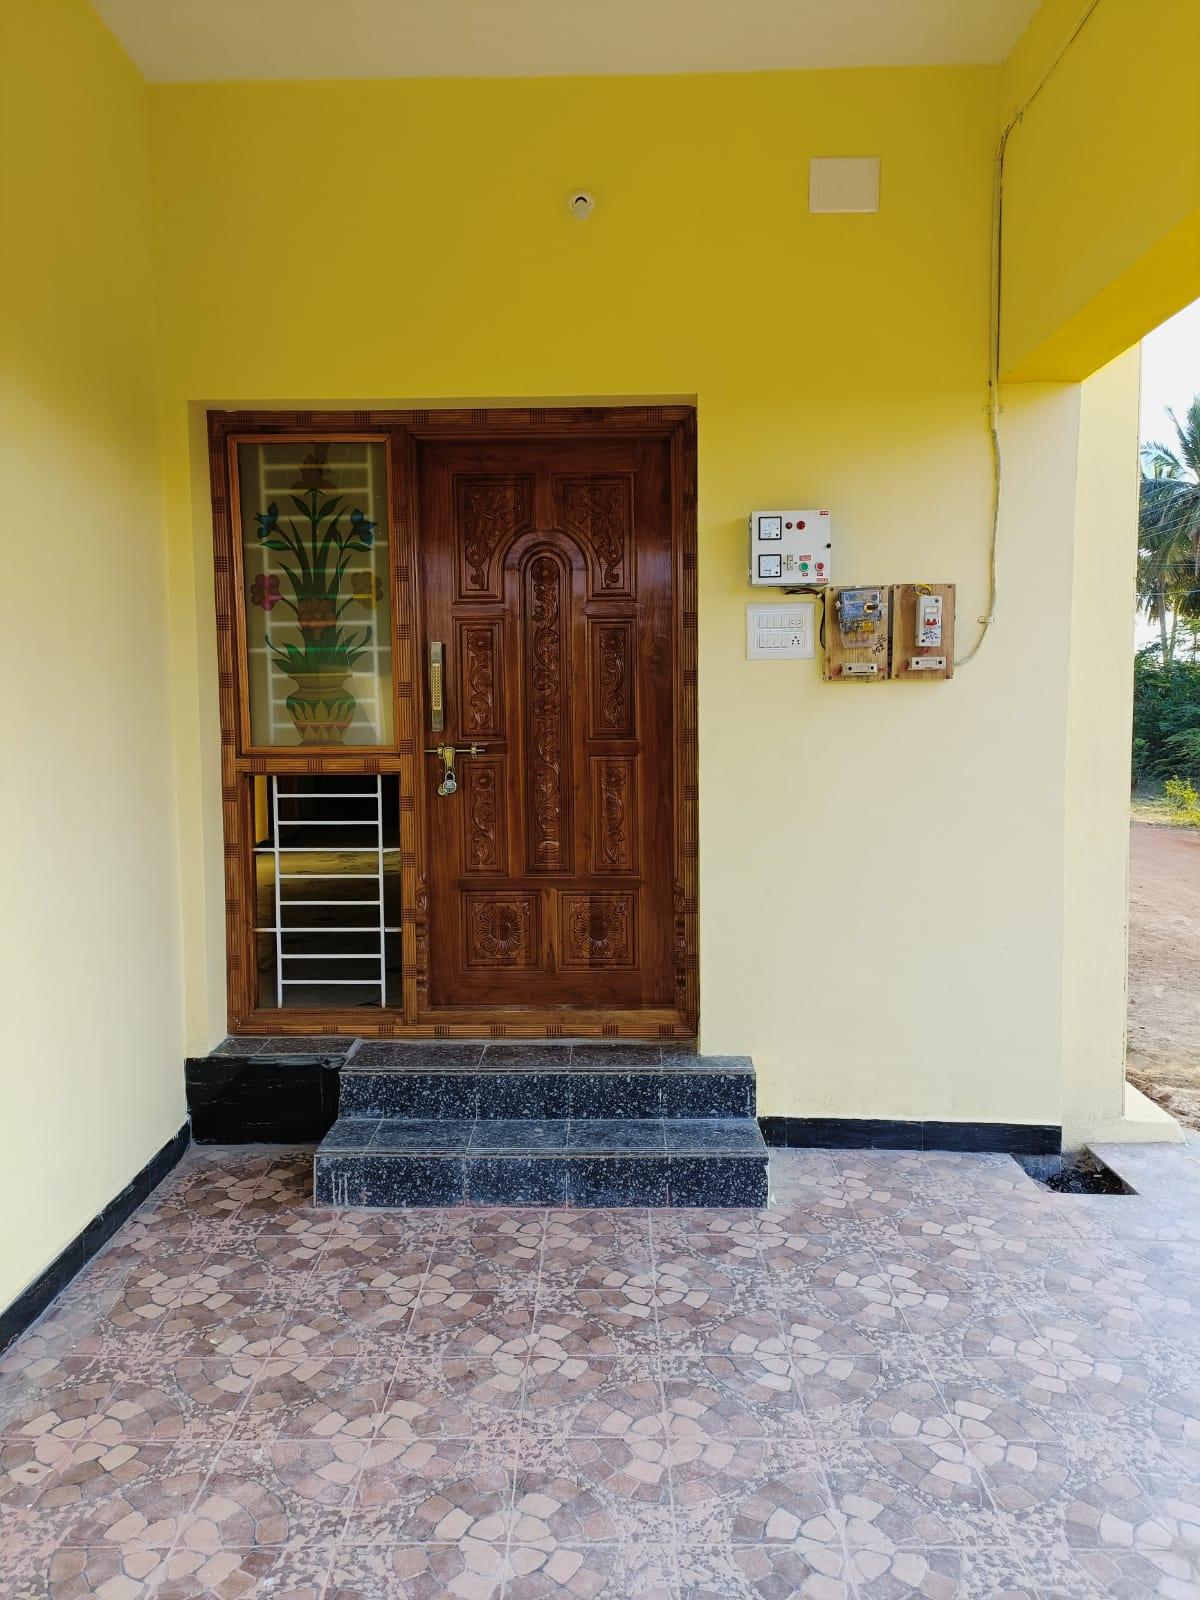 1 Bed/ 2 Bath Rent House/ Bungalow/ Villa; 600 sq. ft. carpet area, UnFurnished for rent @Chettiyapatti